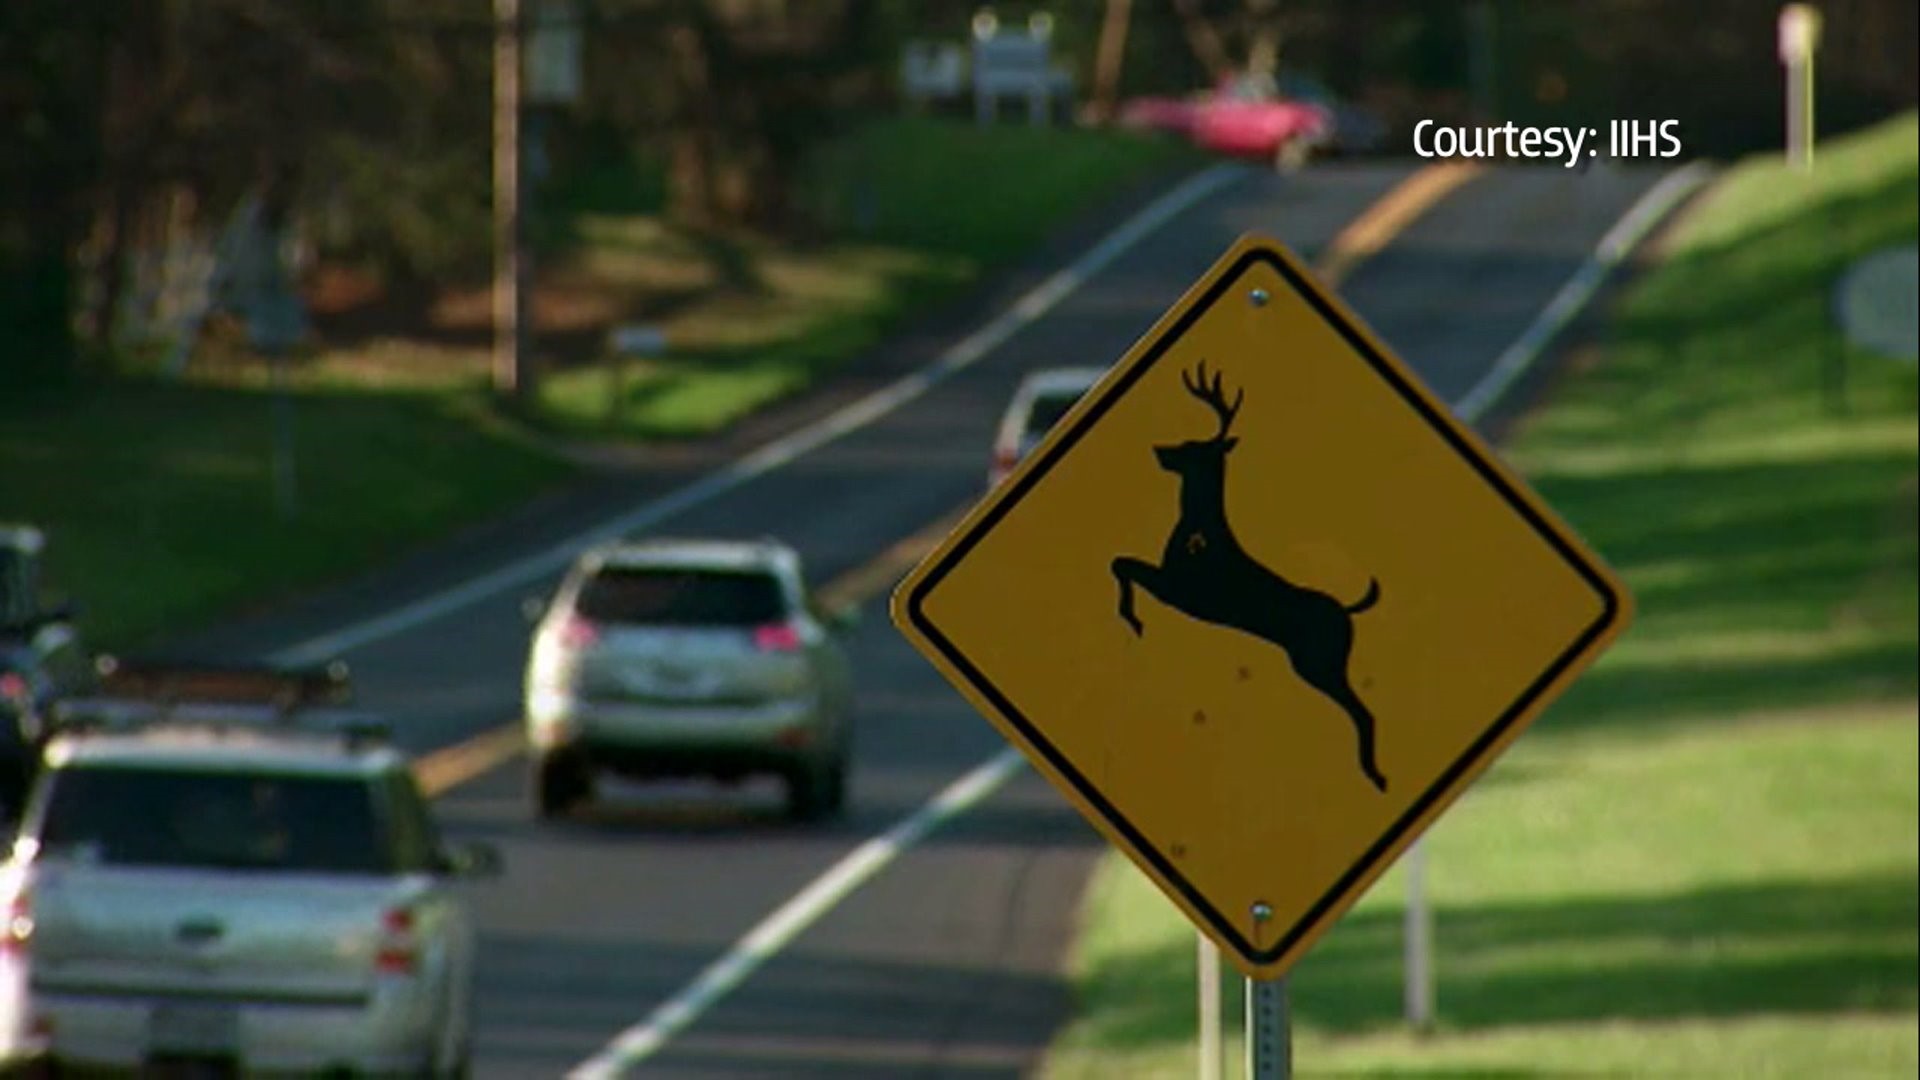 Deer-Related Crashes Rising